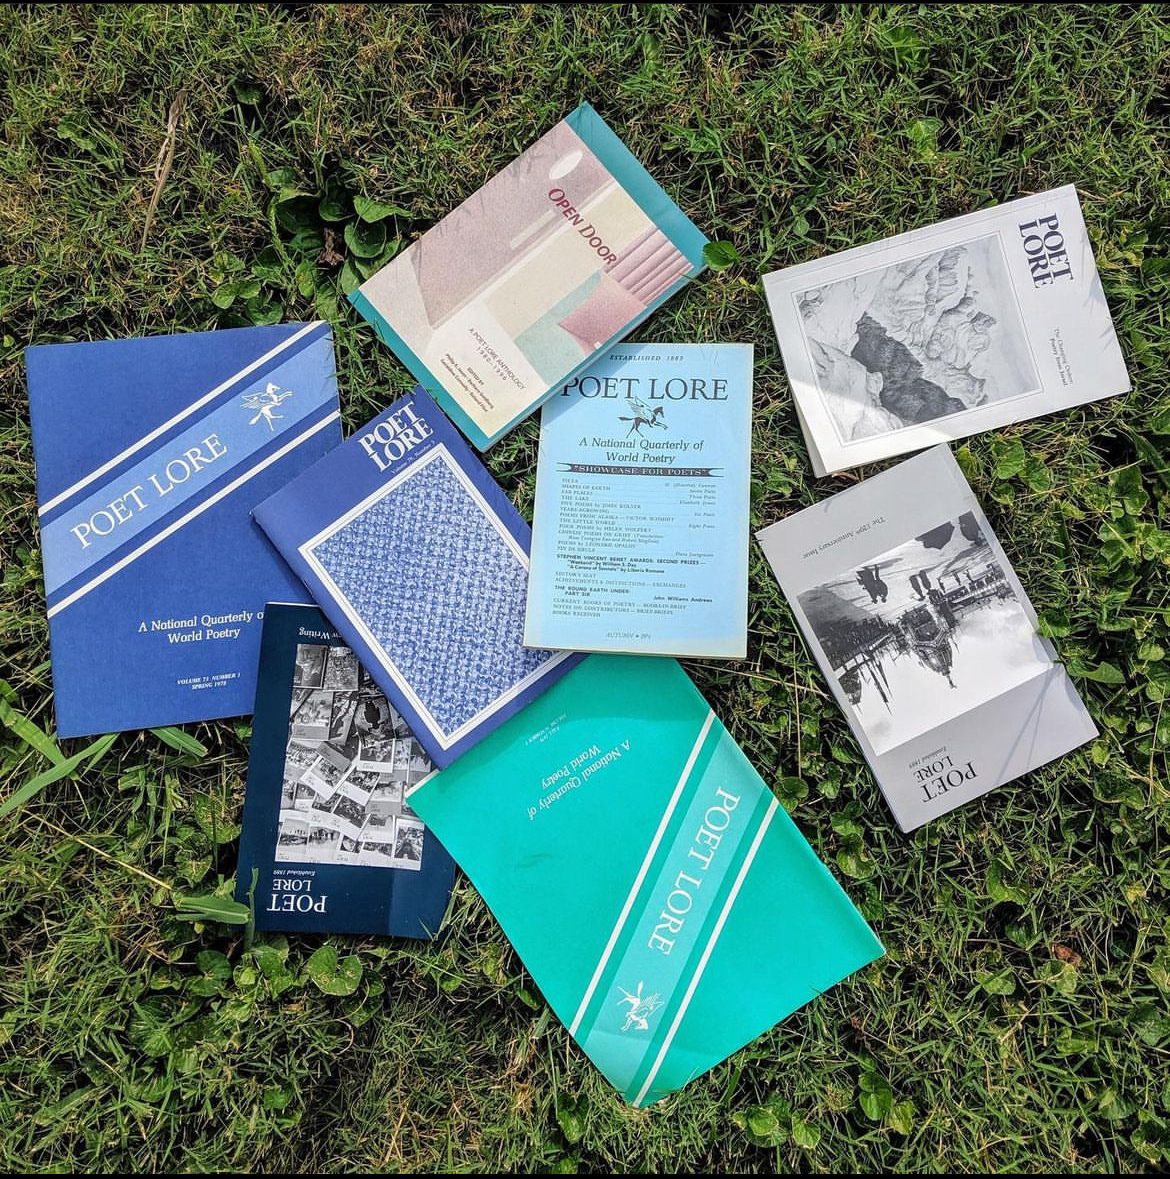 A collection of books lying on the grass